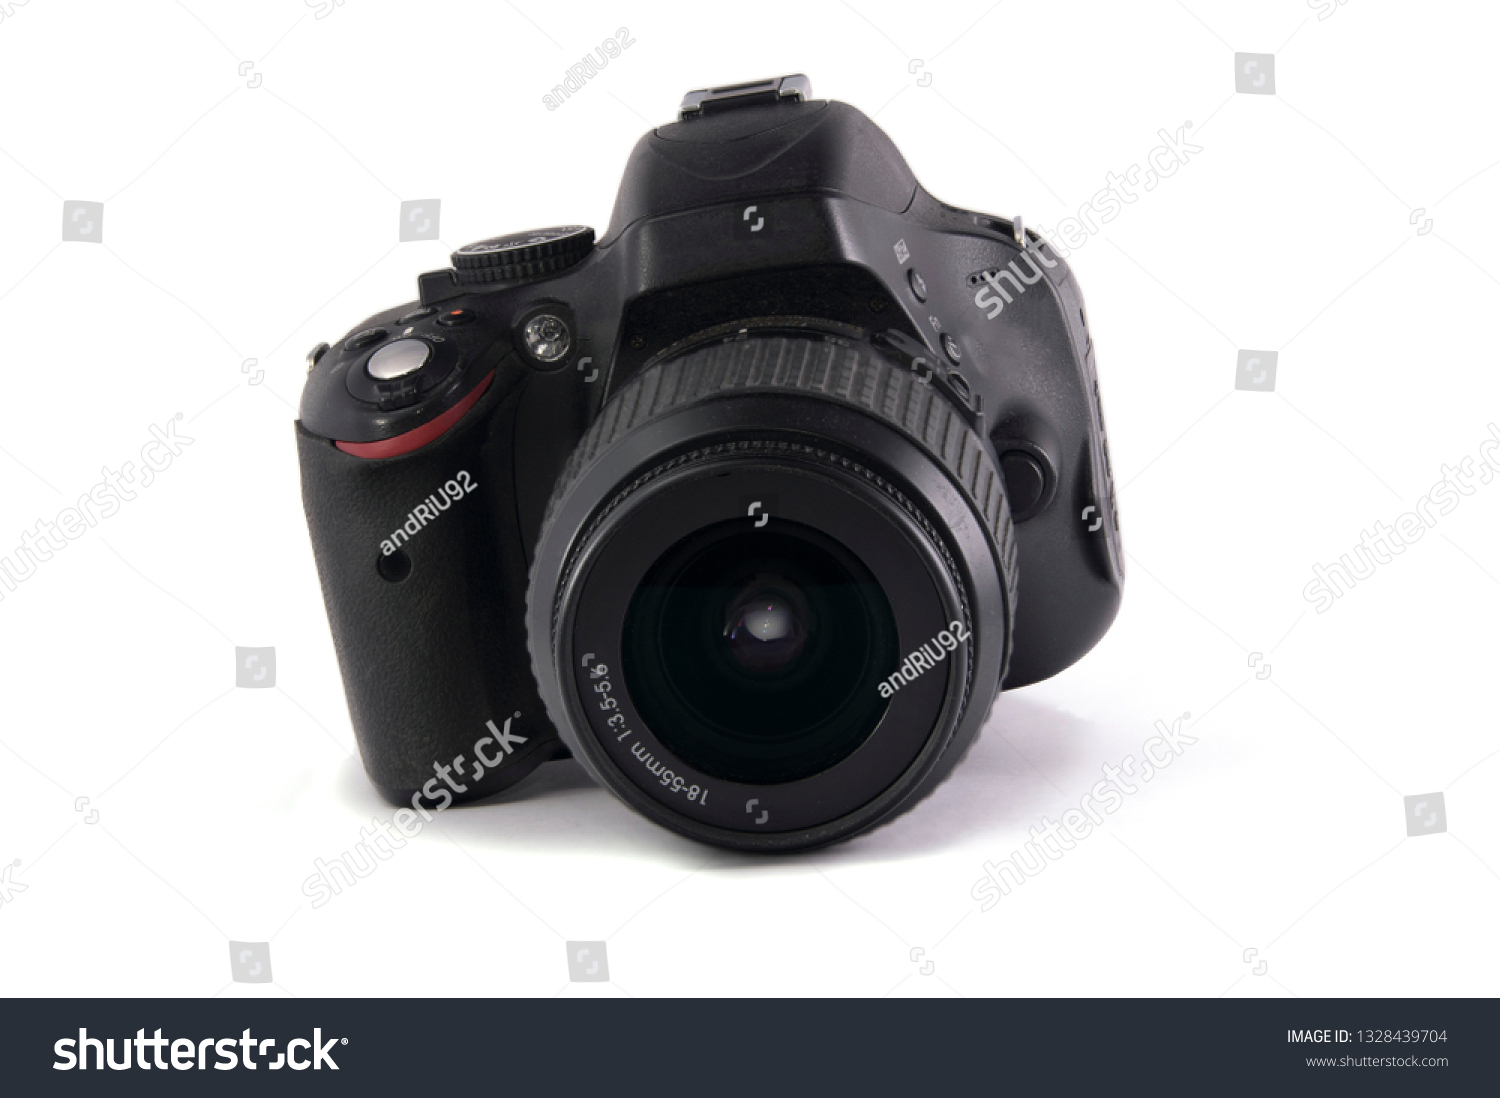 modern digital SLR photo camera with lens on white background. isolated. #1328439704